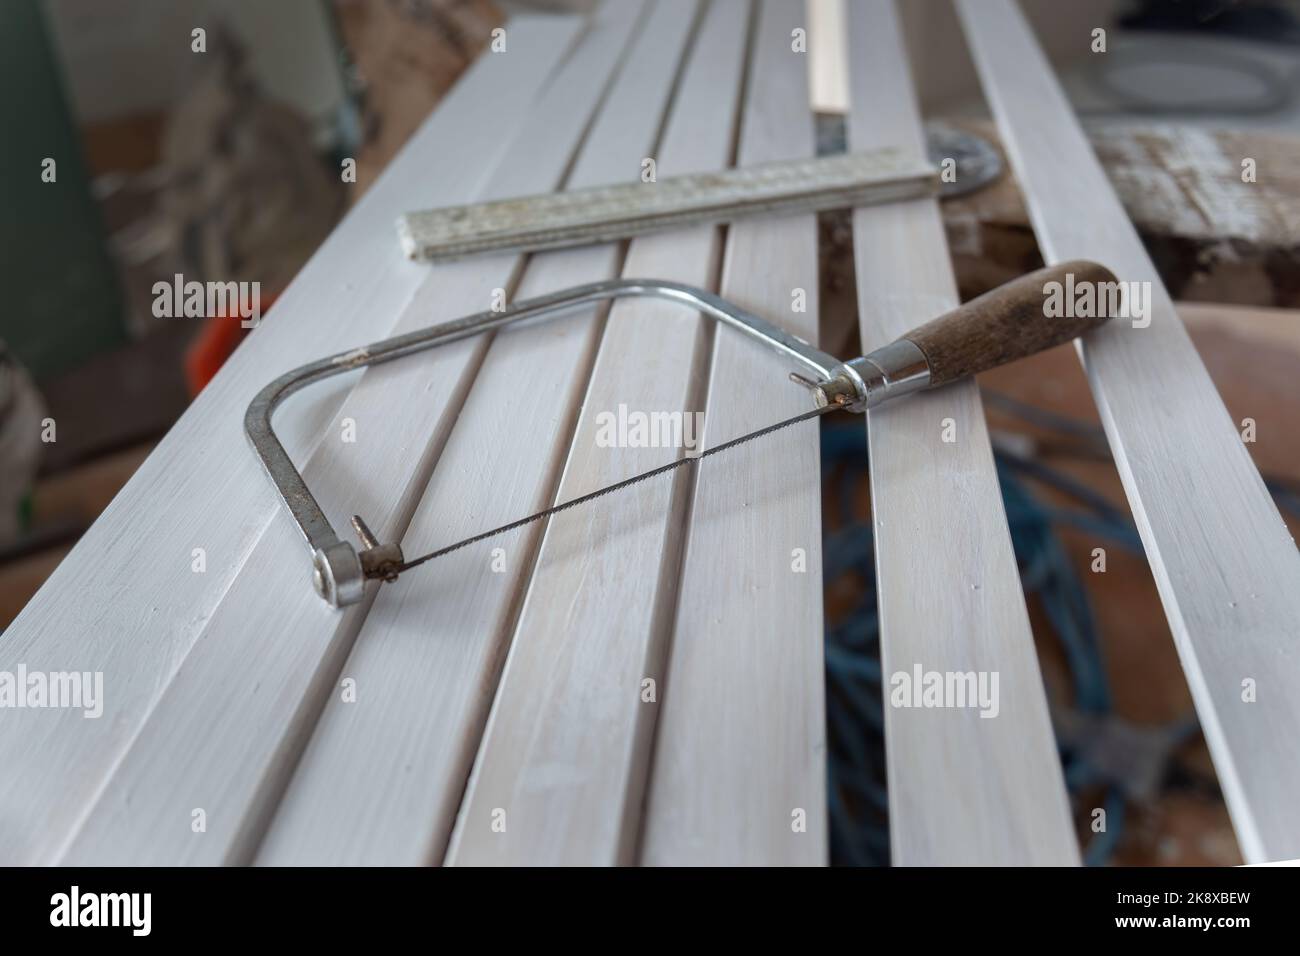 Hand saw and ruler on wood planks. Home renovation project. Stock Photo